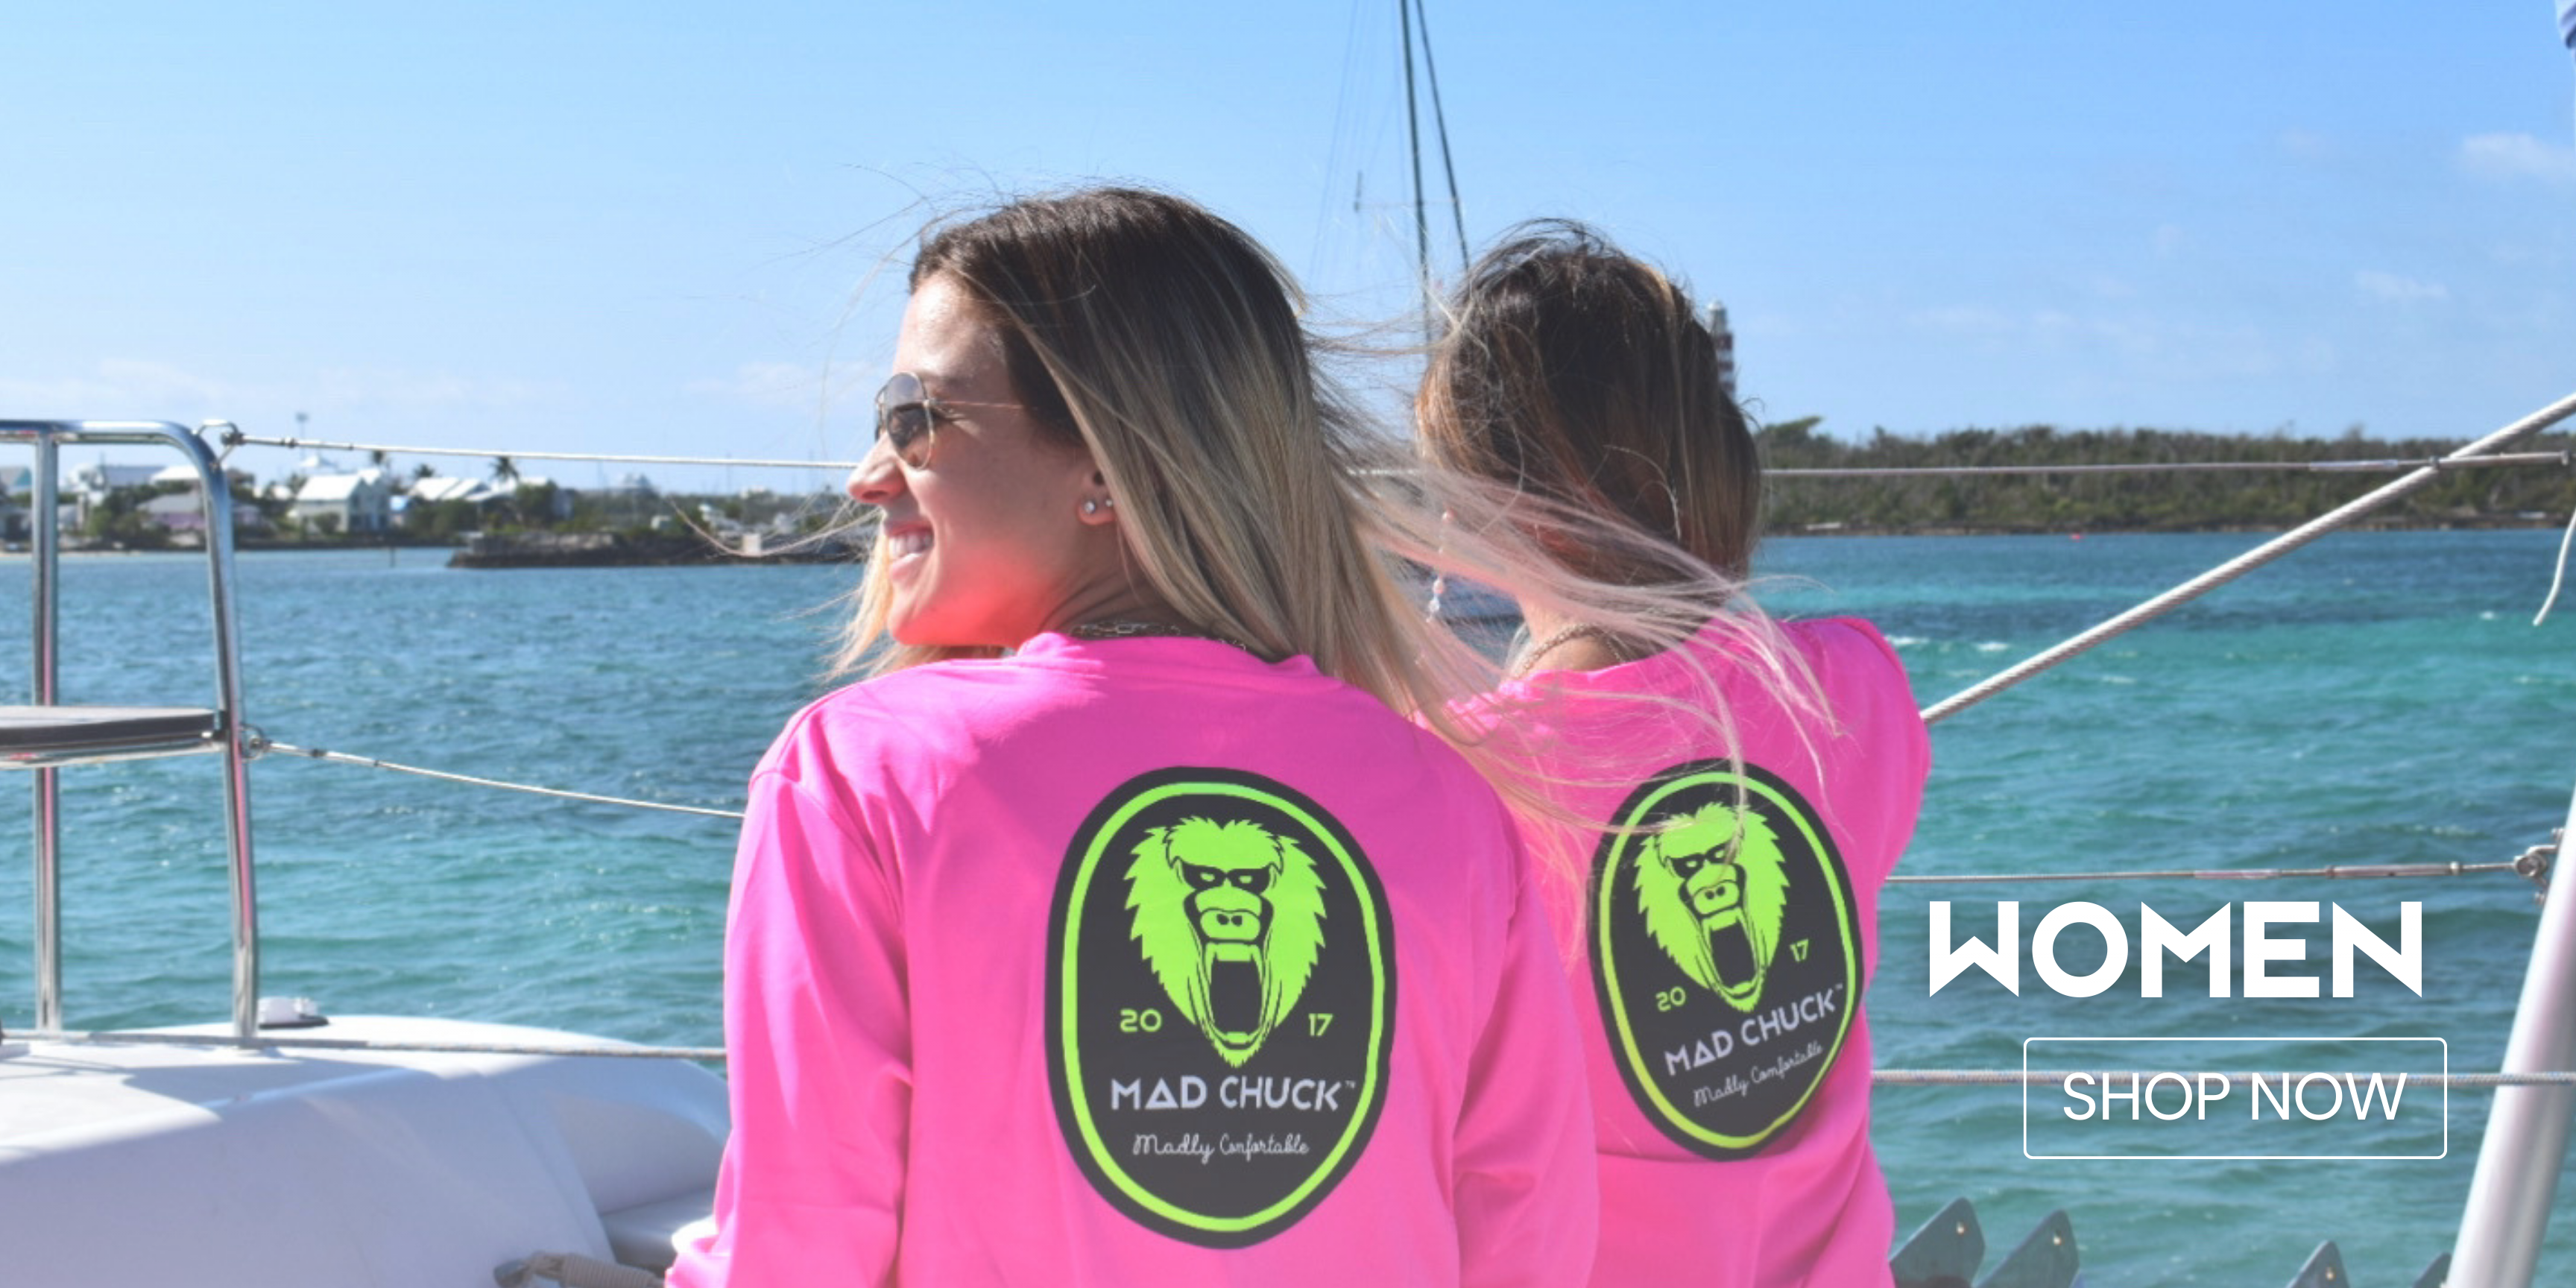 Women - Shop Now: Woman wearing a bright pink Mad Chuck Rashguard sitting on a boat, smiling, with water and a sailboat in the background. Click to browse Women Collection.